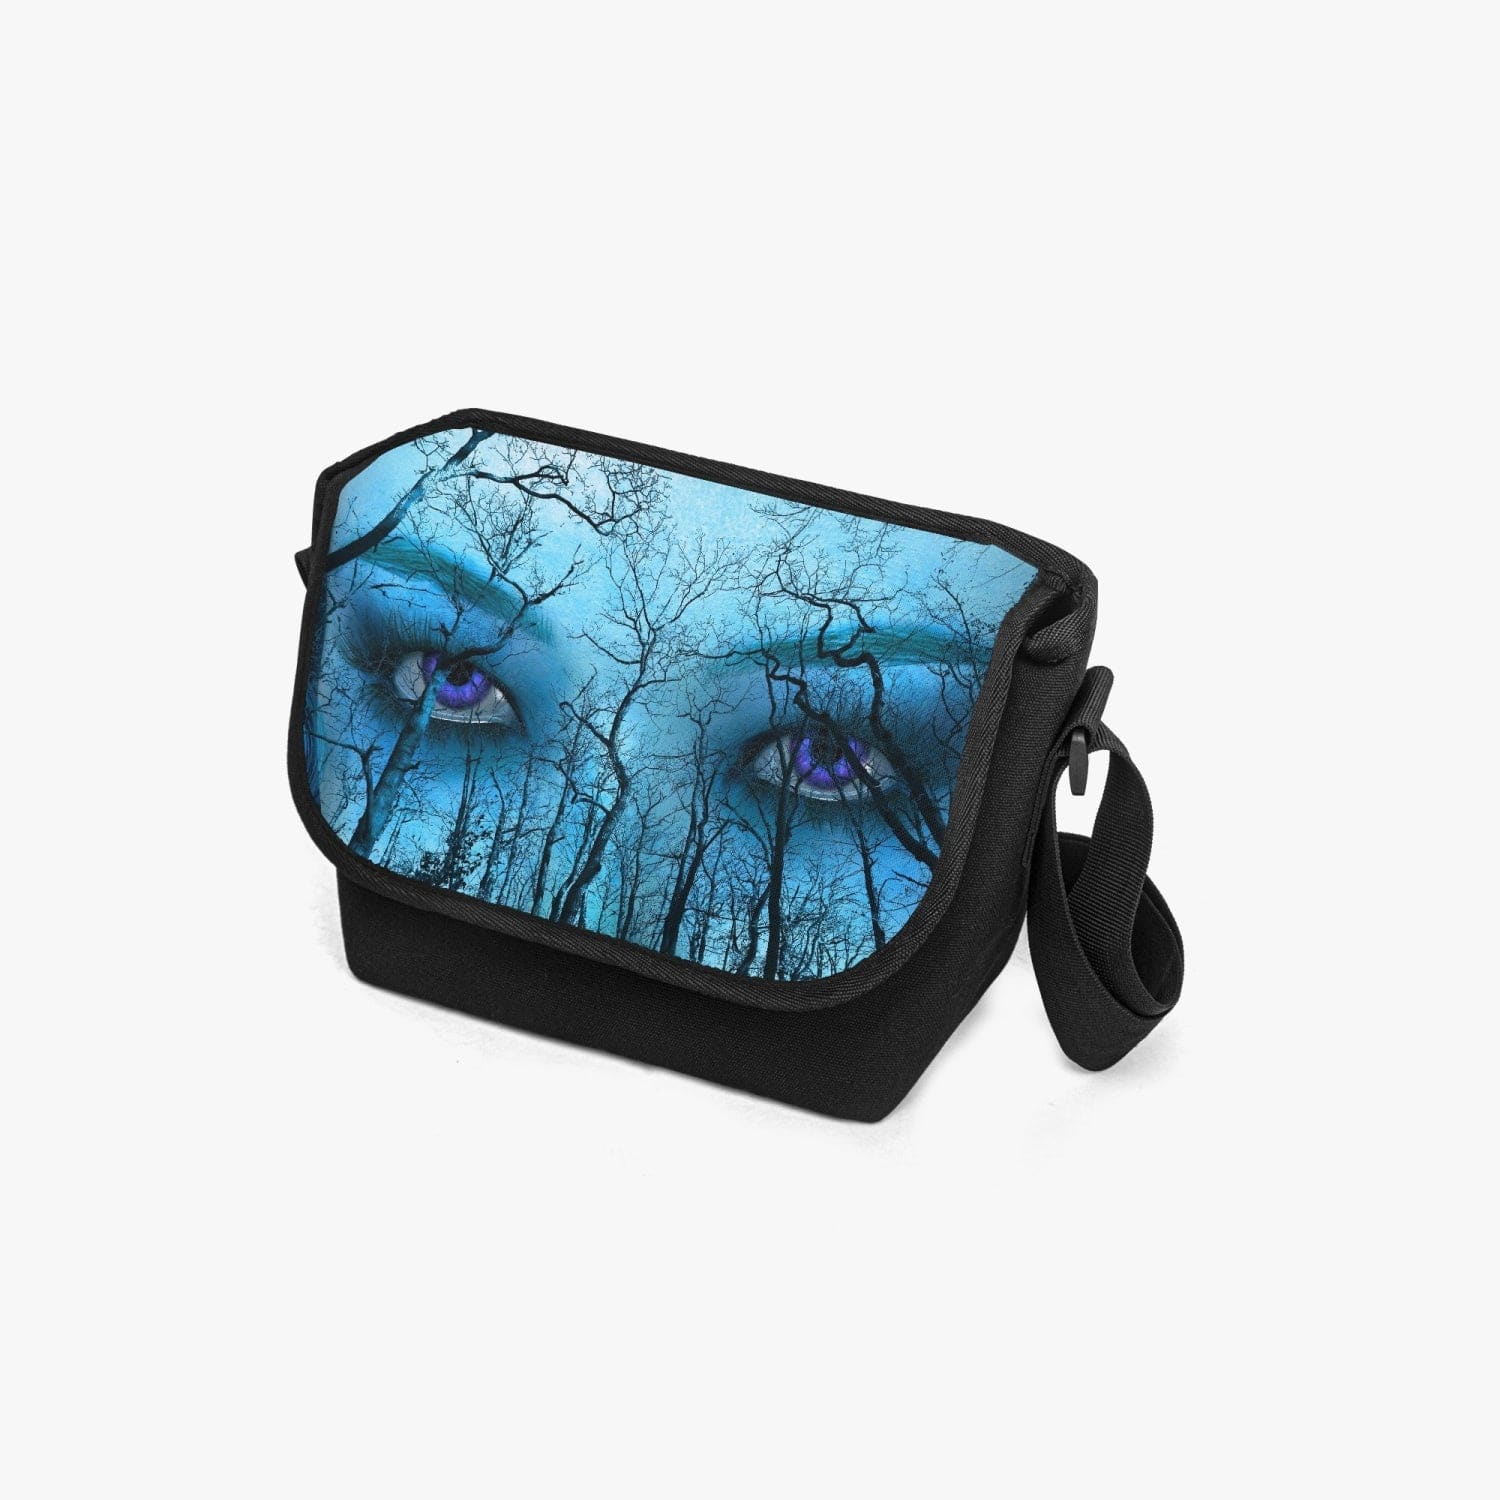 Piercing purple eyes feature on a forest themed print on this canvas messenger bag at Gallery Serpentine.  Blue and aqua tones give this a supernatural feel with a gothic naturecore theme 2